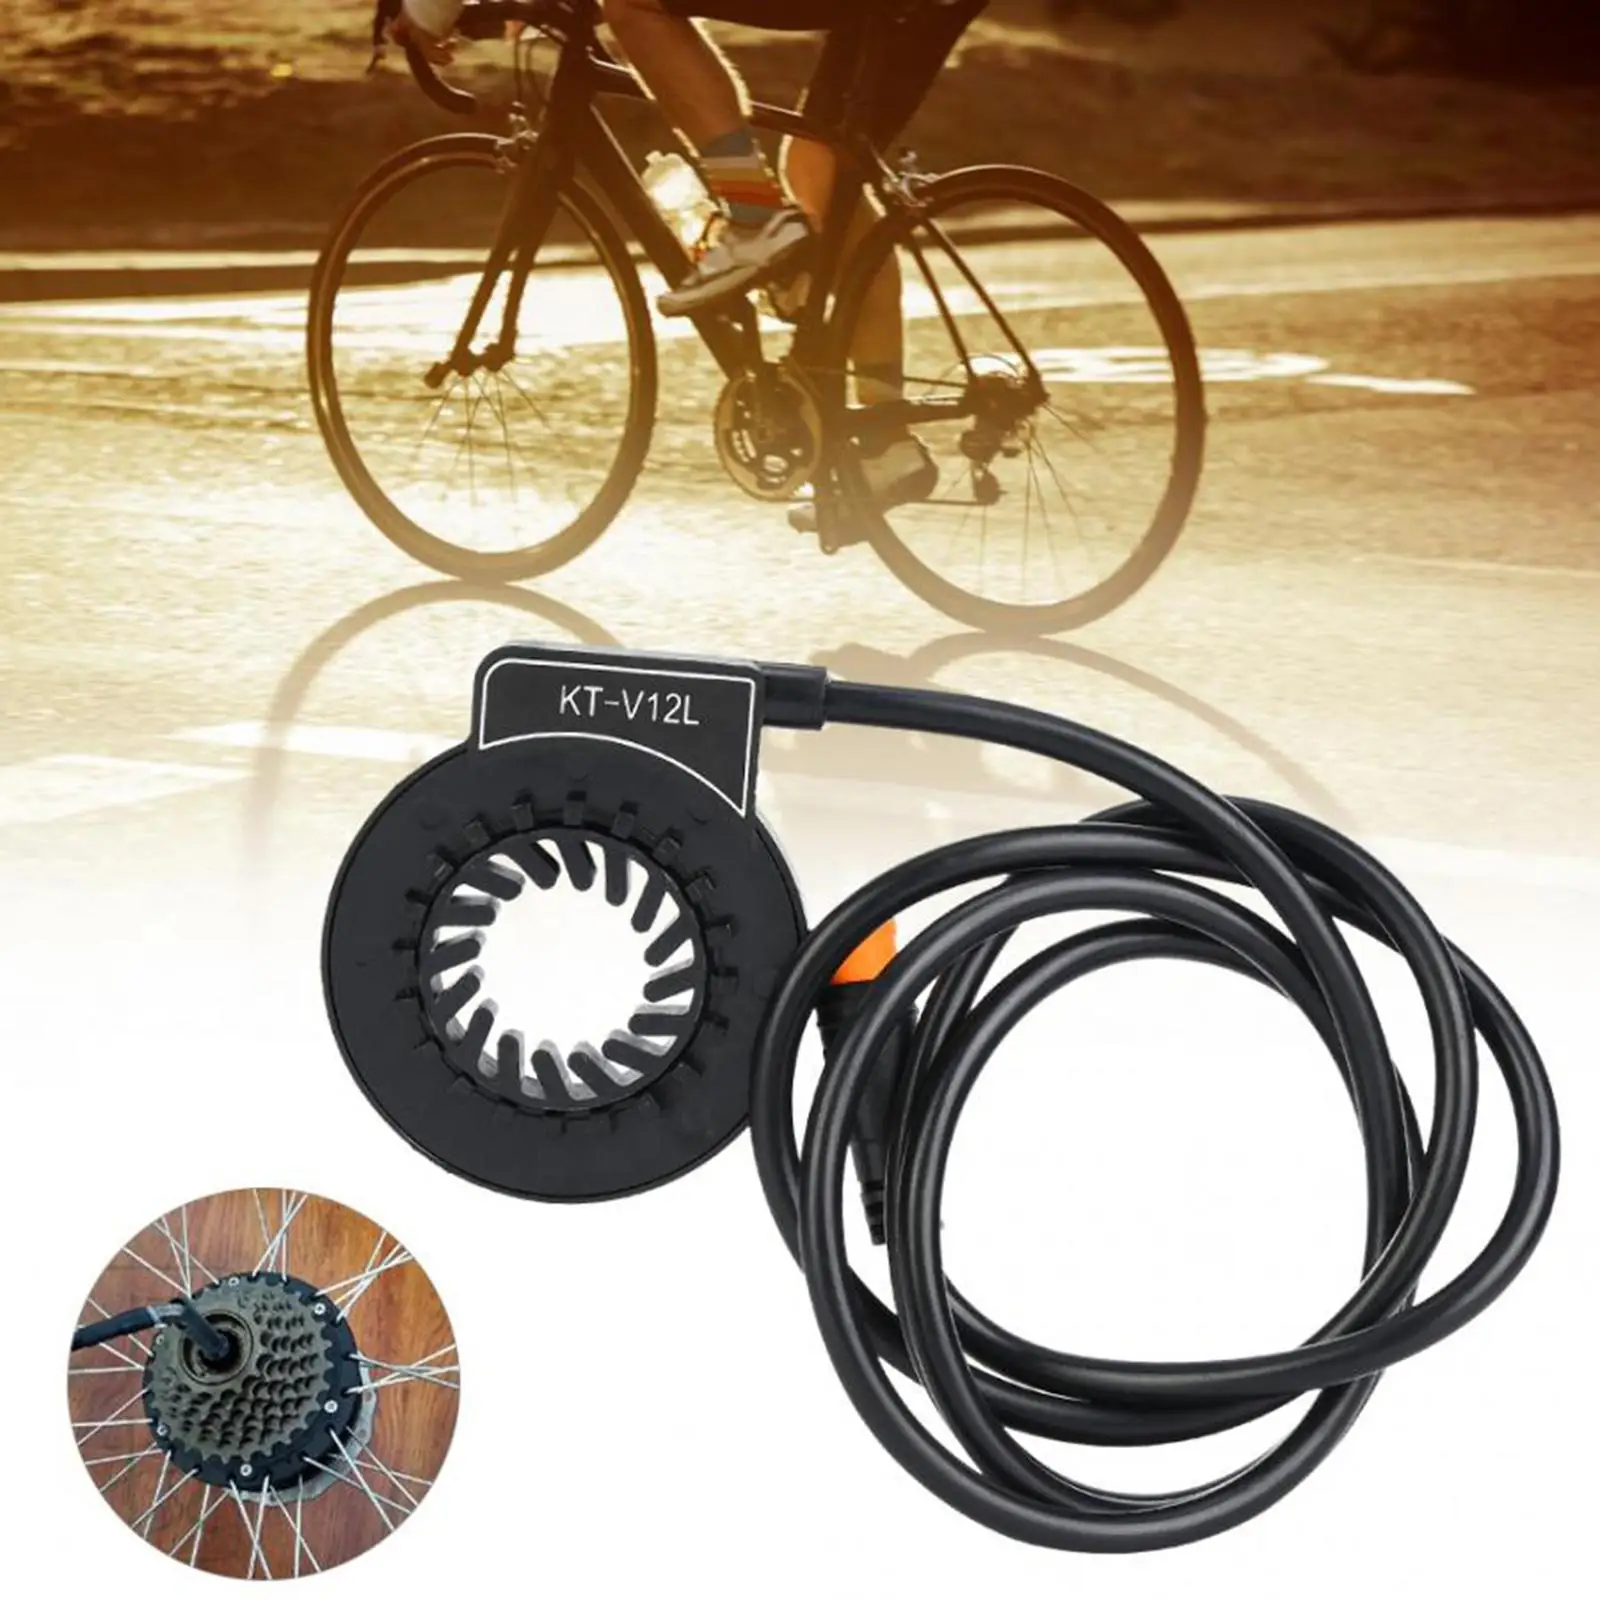 E-bike Pedal Magnets Electric Bicycle System Assistant Sensor Speed Sensor Black Color Easy to Install